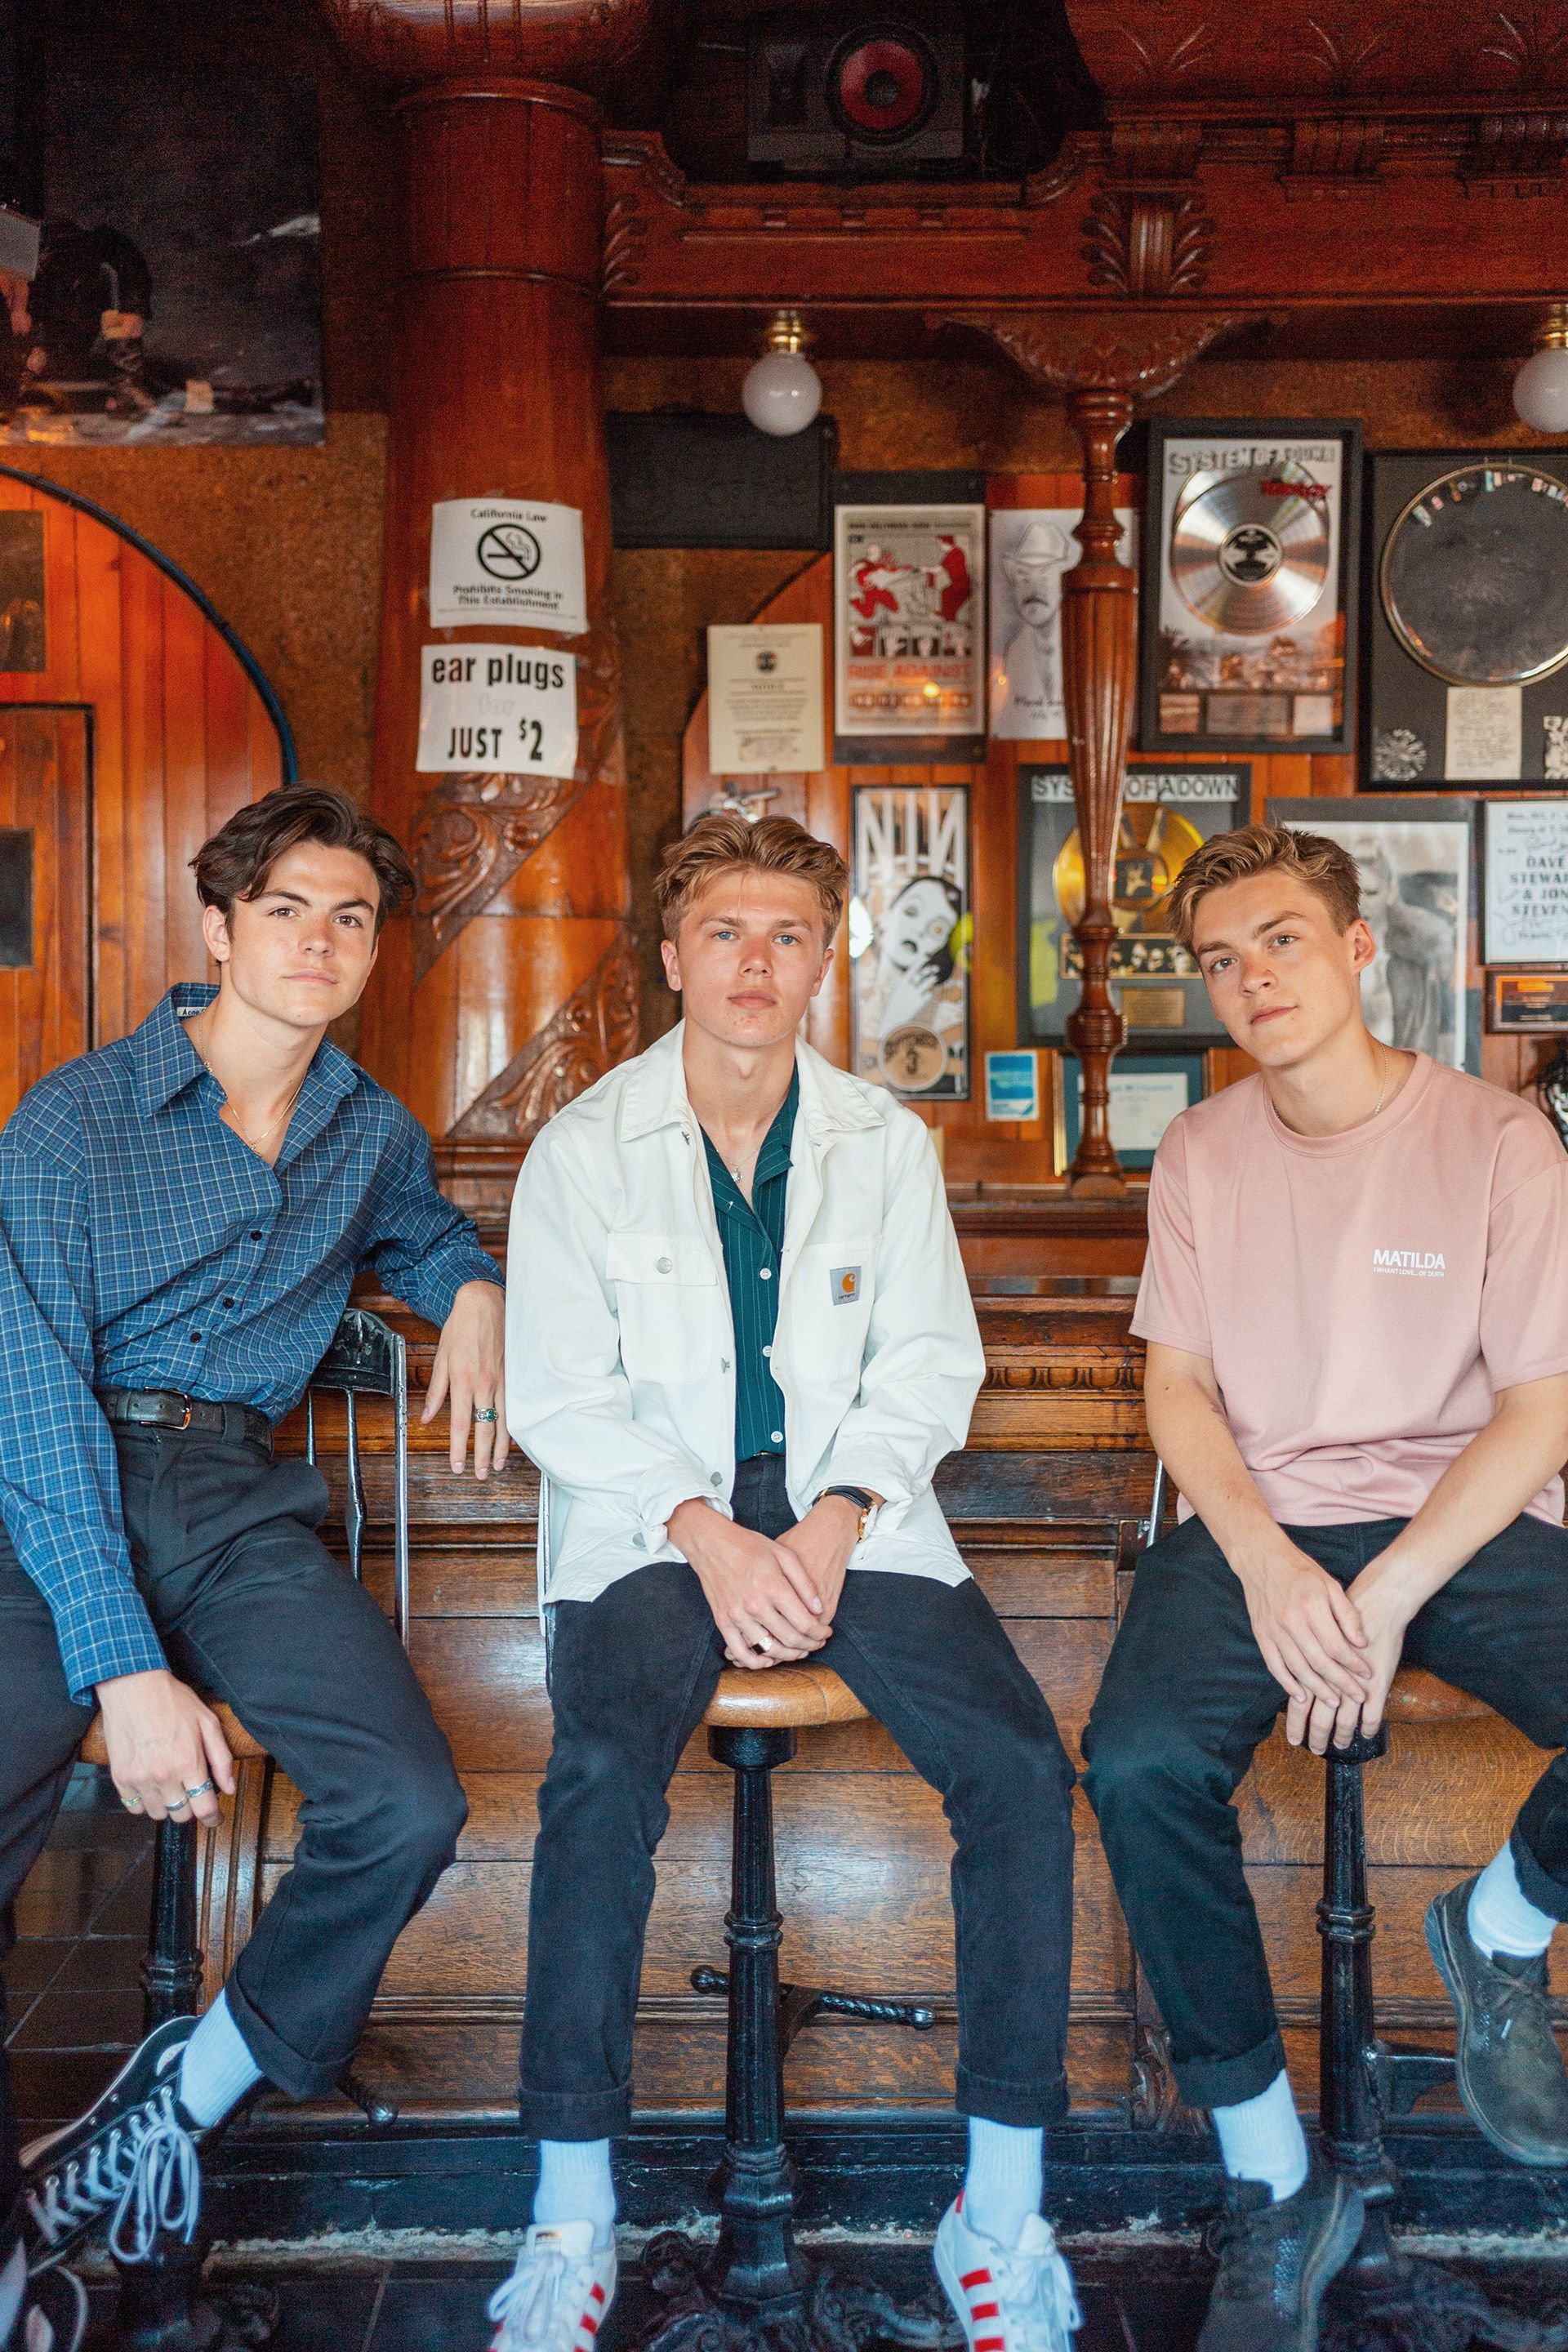 General photo of New Hope Club